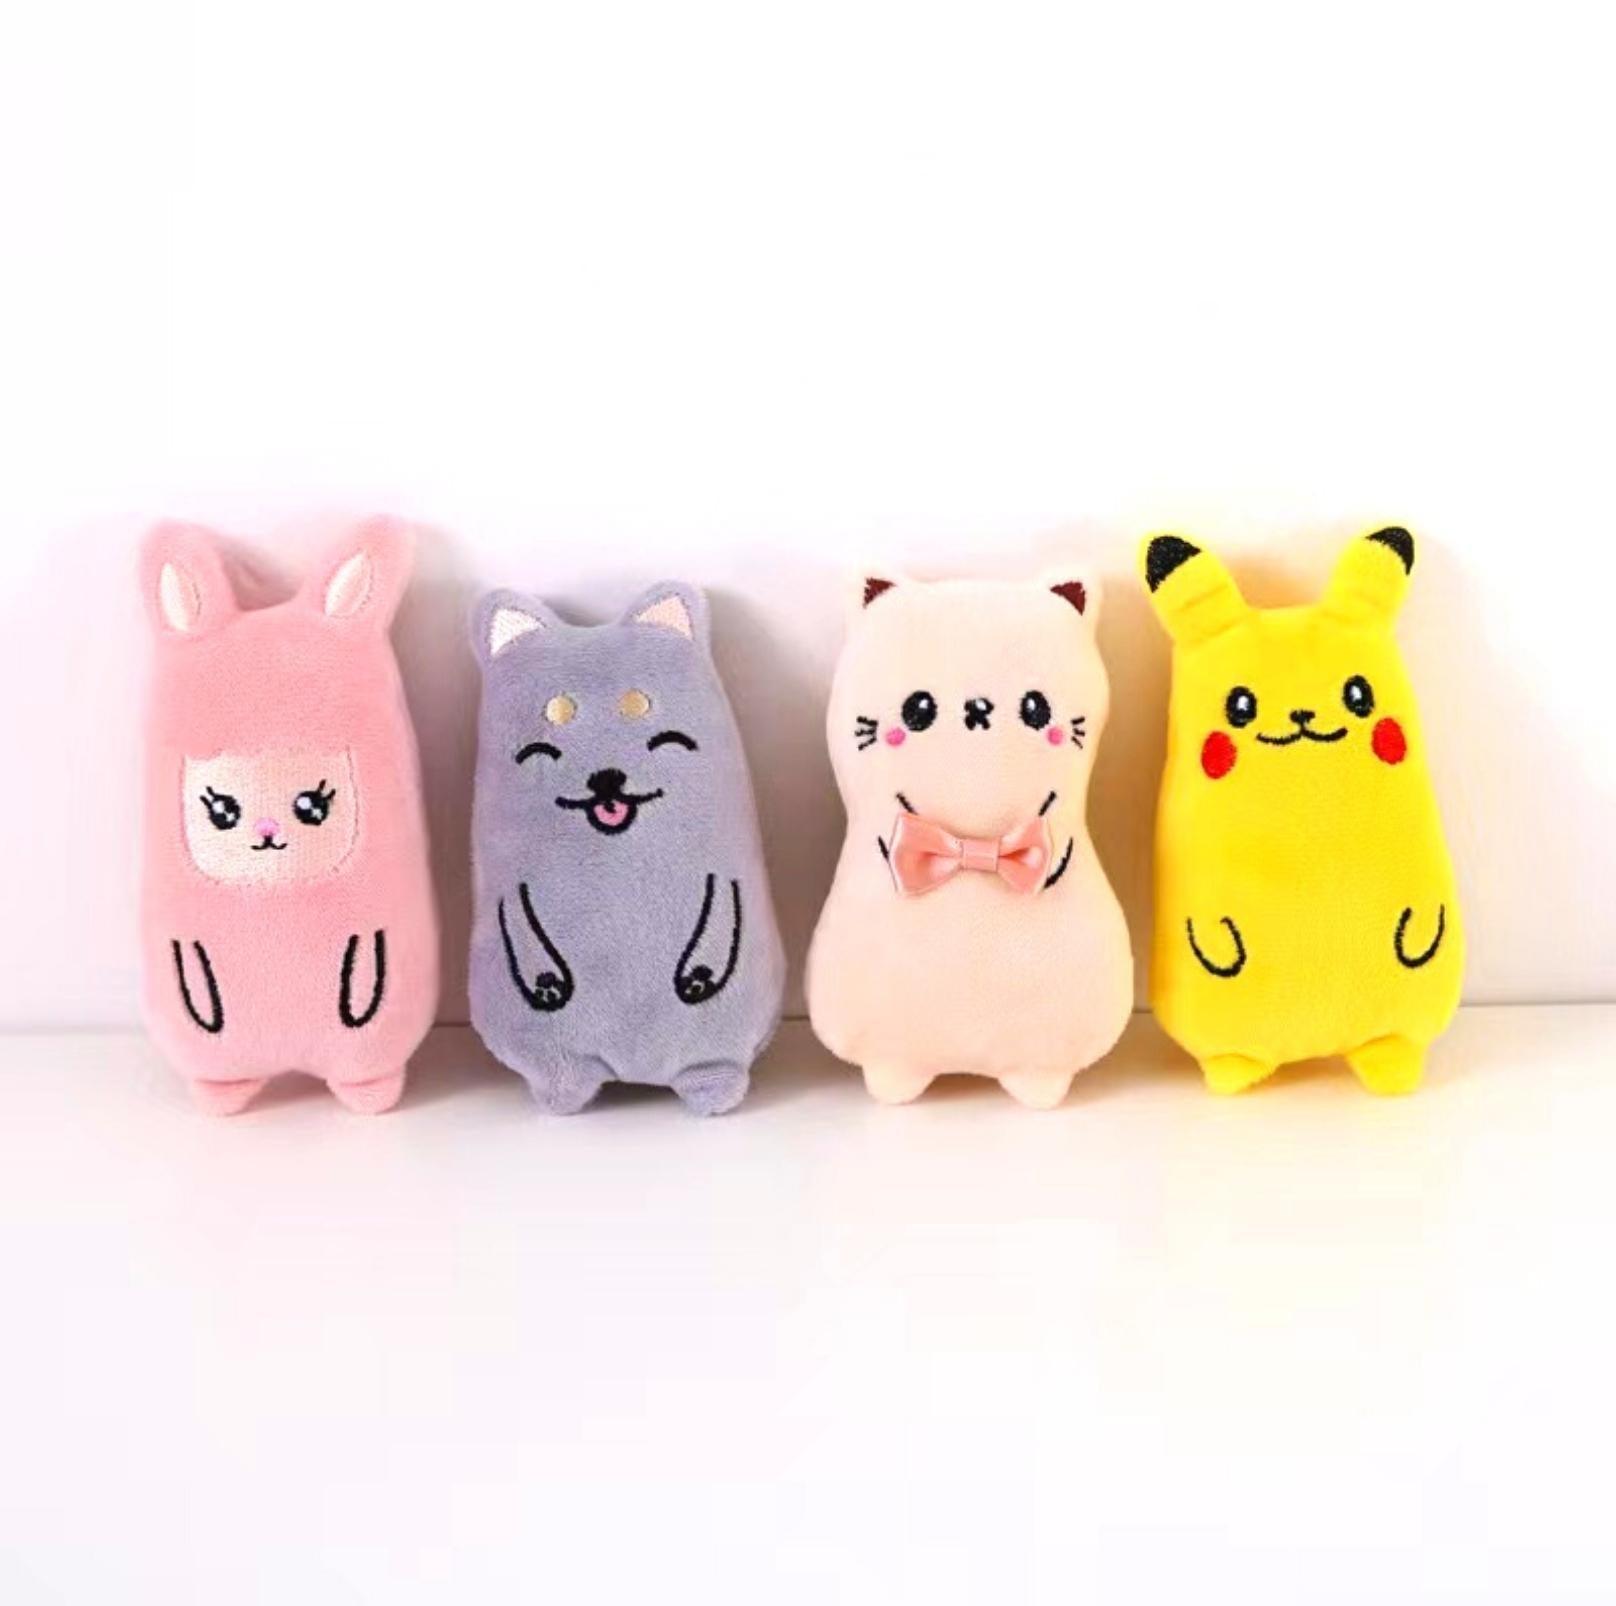 Kitty Styled Cartoon Plush Cat Toys Set of 4 - Built-in Bell And Catnip - {{product.type}} - PawPawUp